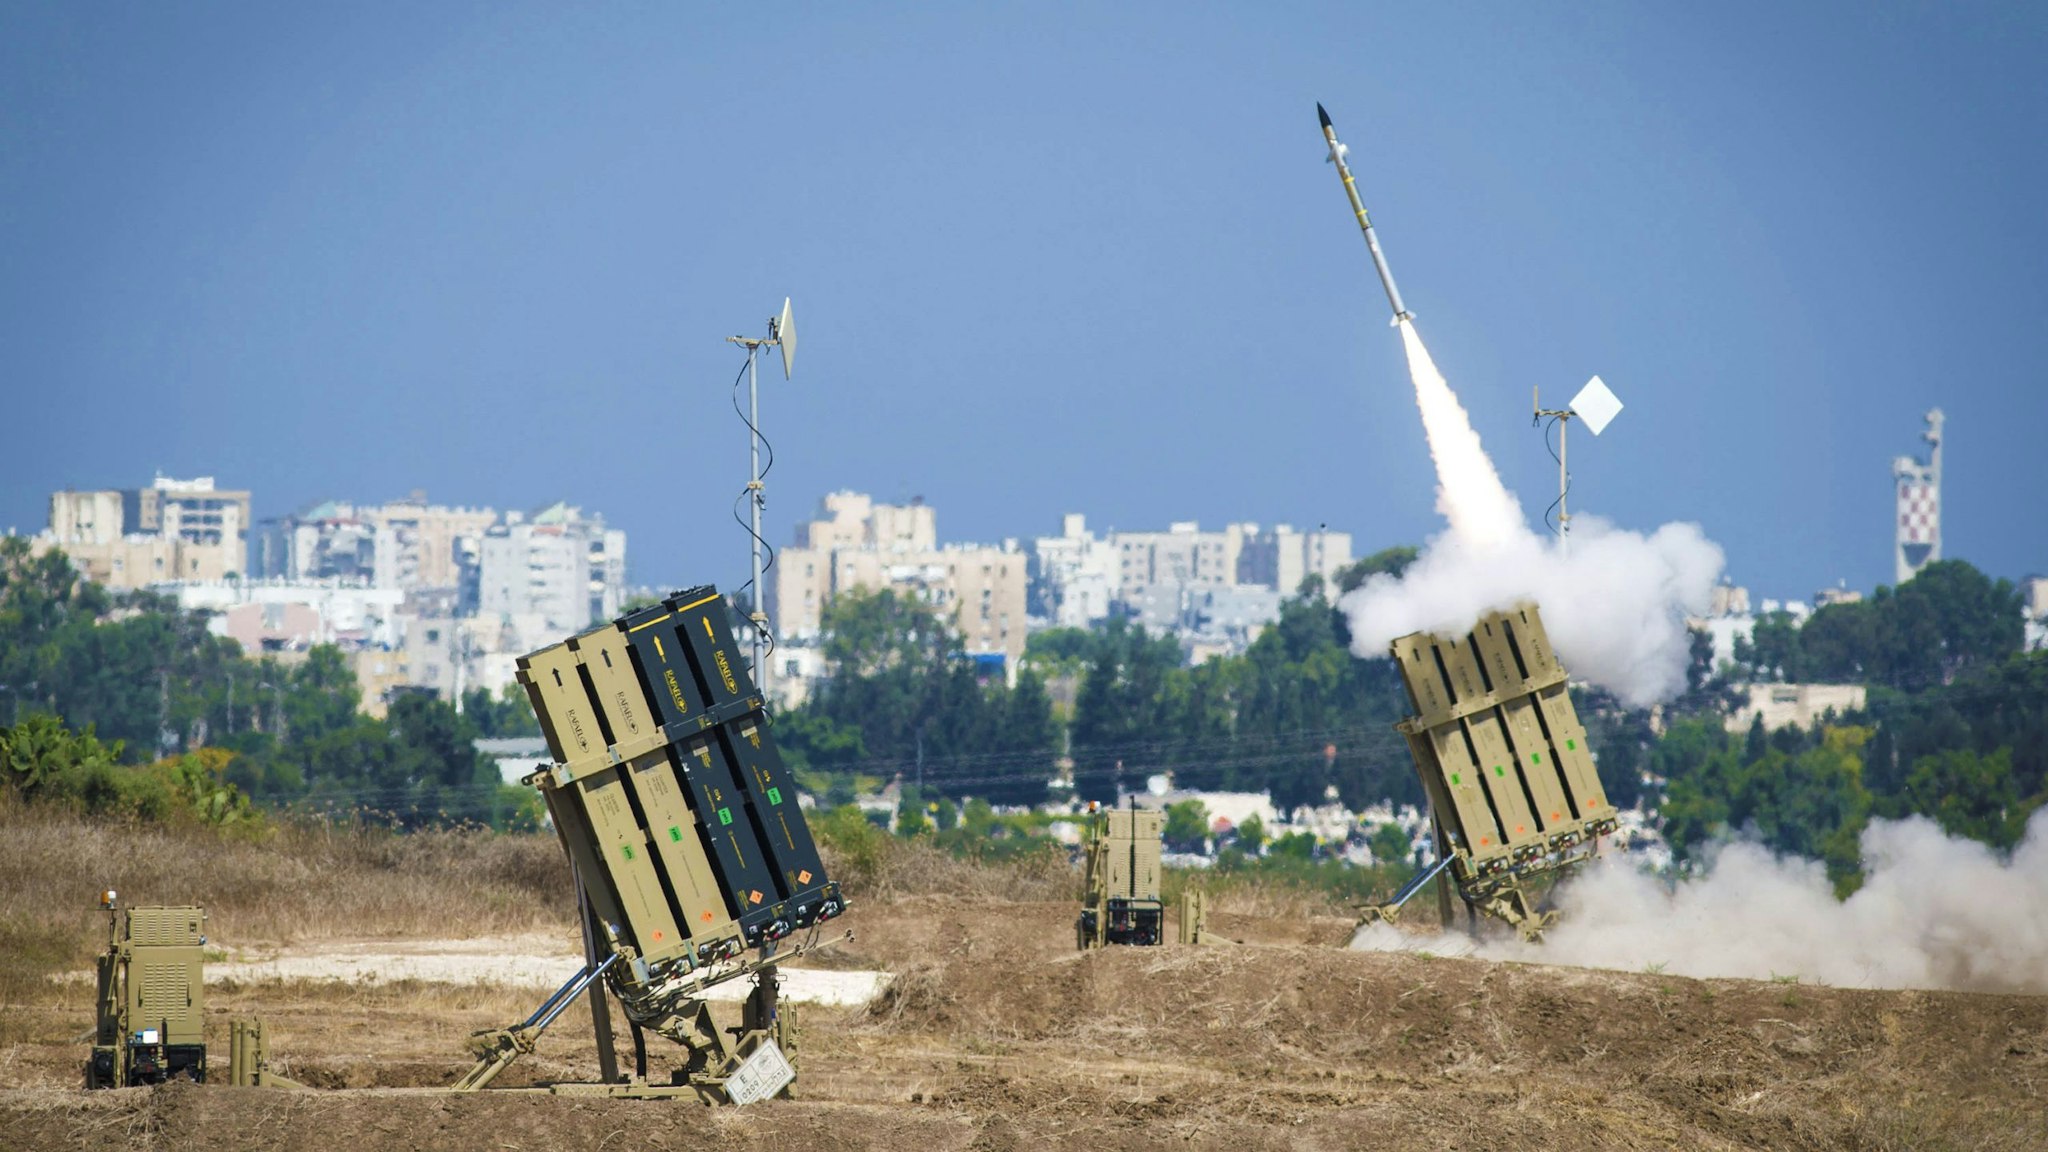 ASHDOD, ISRAEL - JULY 08: The Iron Dome air-defense system fires to intercept a rocket over the city of Ashdod on July 8, 2014, in Ashdod, Israel. Due to recent escalation in the region, the Israeli army started new deployments at the border with the Gaza Strip. In the past 3 weeks more then 130 rockets where reportedly fired from Gaza into Israel.